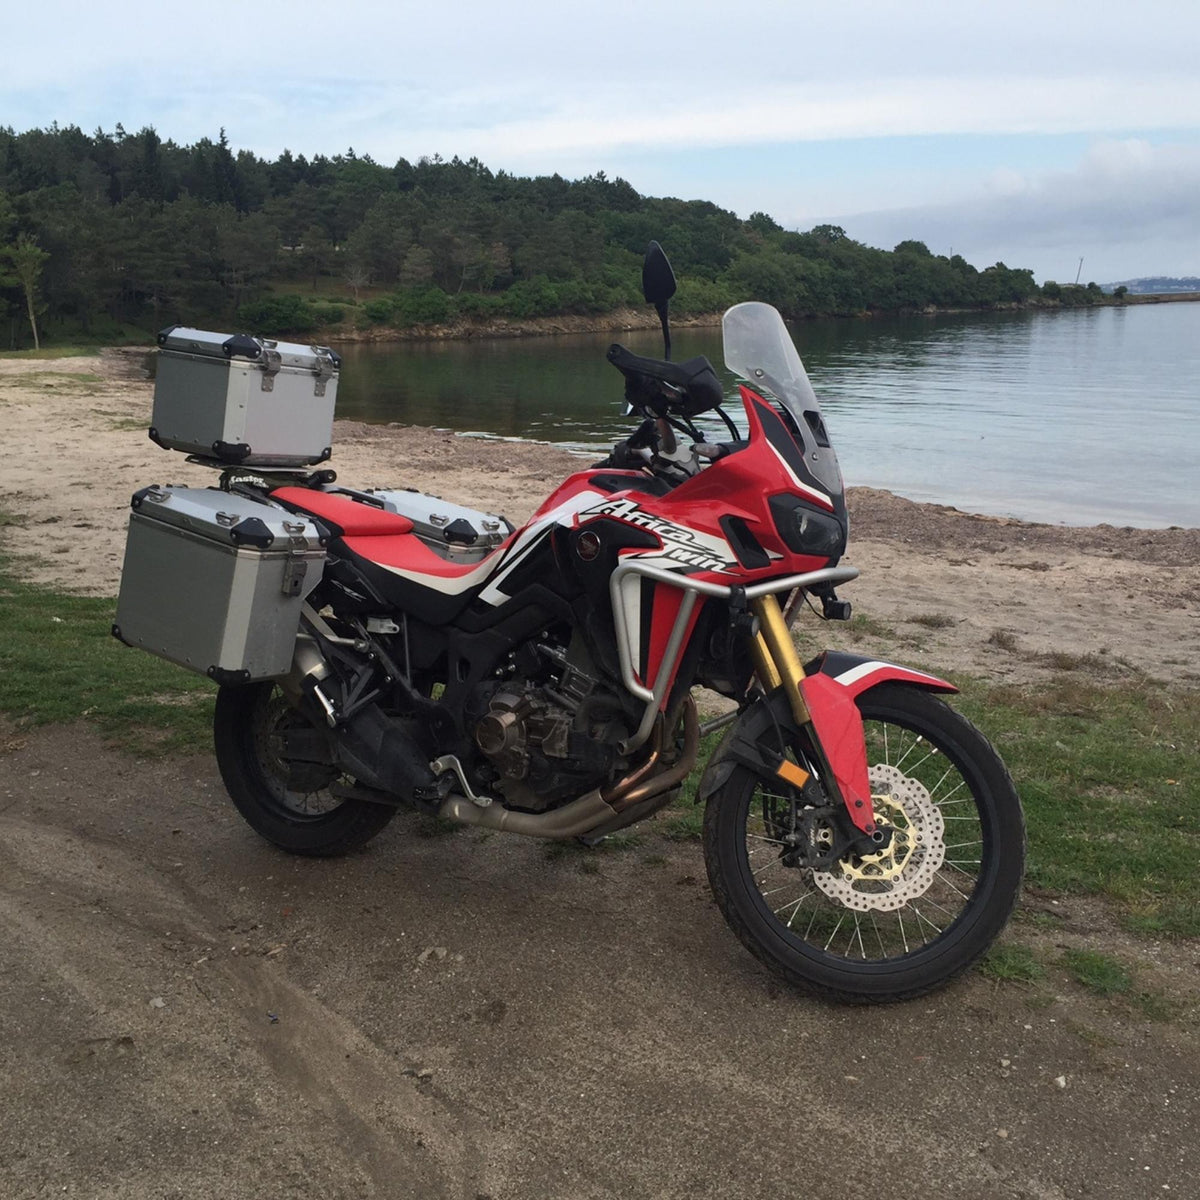 XPAN+ Aluminum Side Case Set, Honda CRF1000 L / CRF1100 L Africa Twin and Africa Twin ADV Sports ES (2016 - 2021), KTM 1290 Super Adventure (2021), 2.02.02301, adventure bike luggage, adventure motorcycle panniers, aluminum side cases, GlobeScout motorcycle luggage, GlobeScout XPAN+, Honda, Honda CRF1000 L Africa Twin, Honda CRF1000 L Africa Twin ADV Sports ES, Honda CRF1100 L Africa Twin, Honda CRF1100 L Africa Twin ADV Sports ES, KTM, KTM 1290 Super Adventure, Side Case Sets, XPAN+, Side Case Sets - Impor